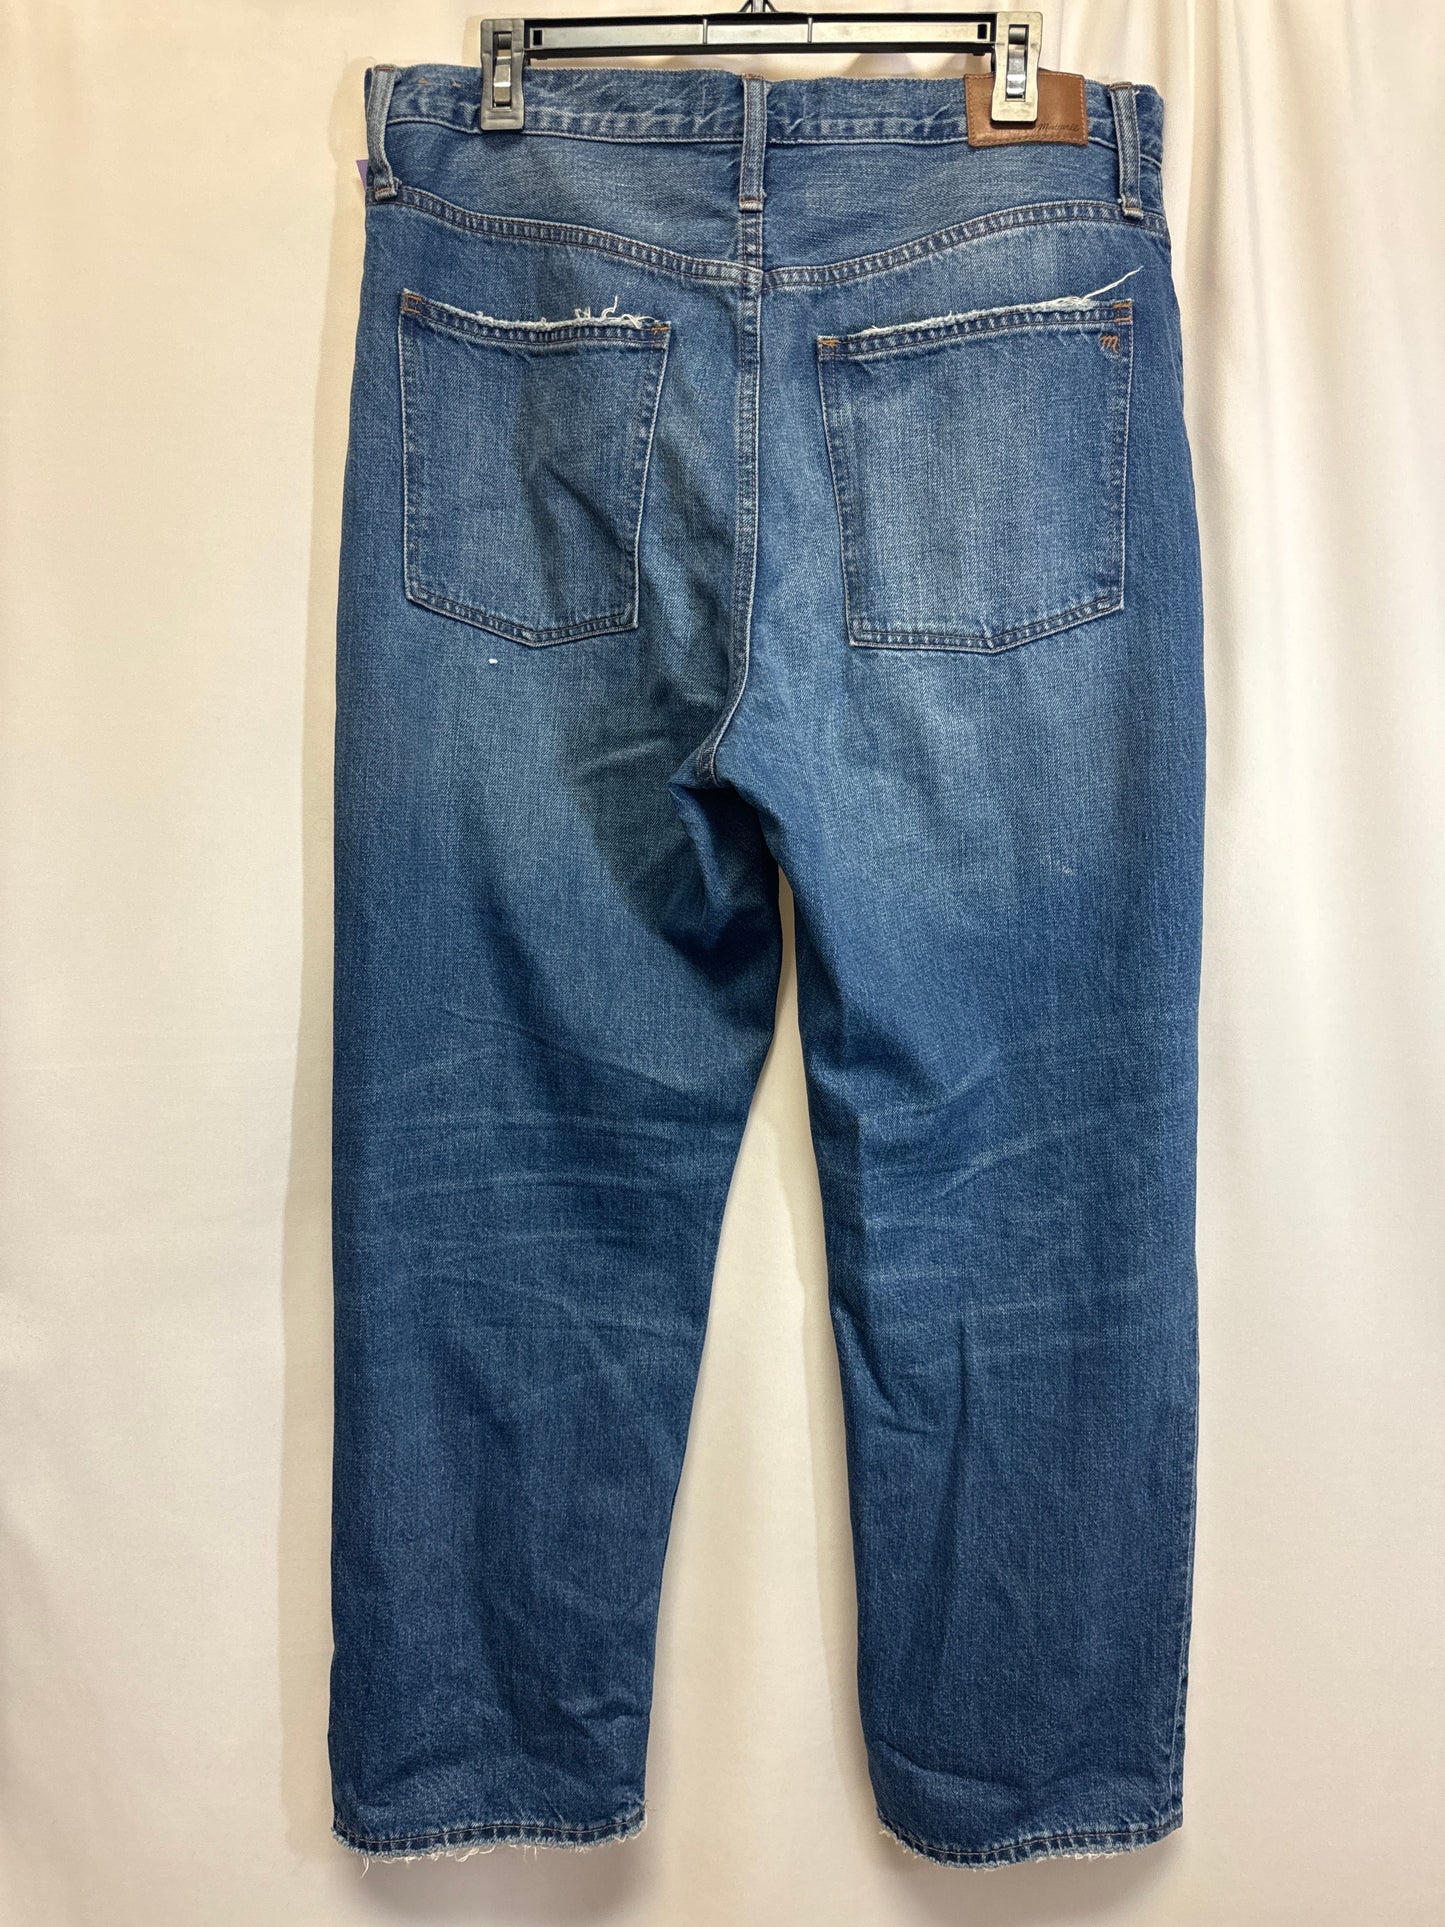 Blue Denim Jeans Cropped Madewell, Size 14